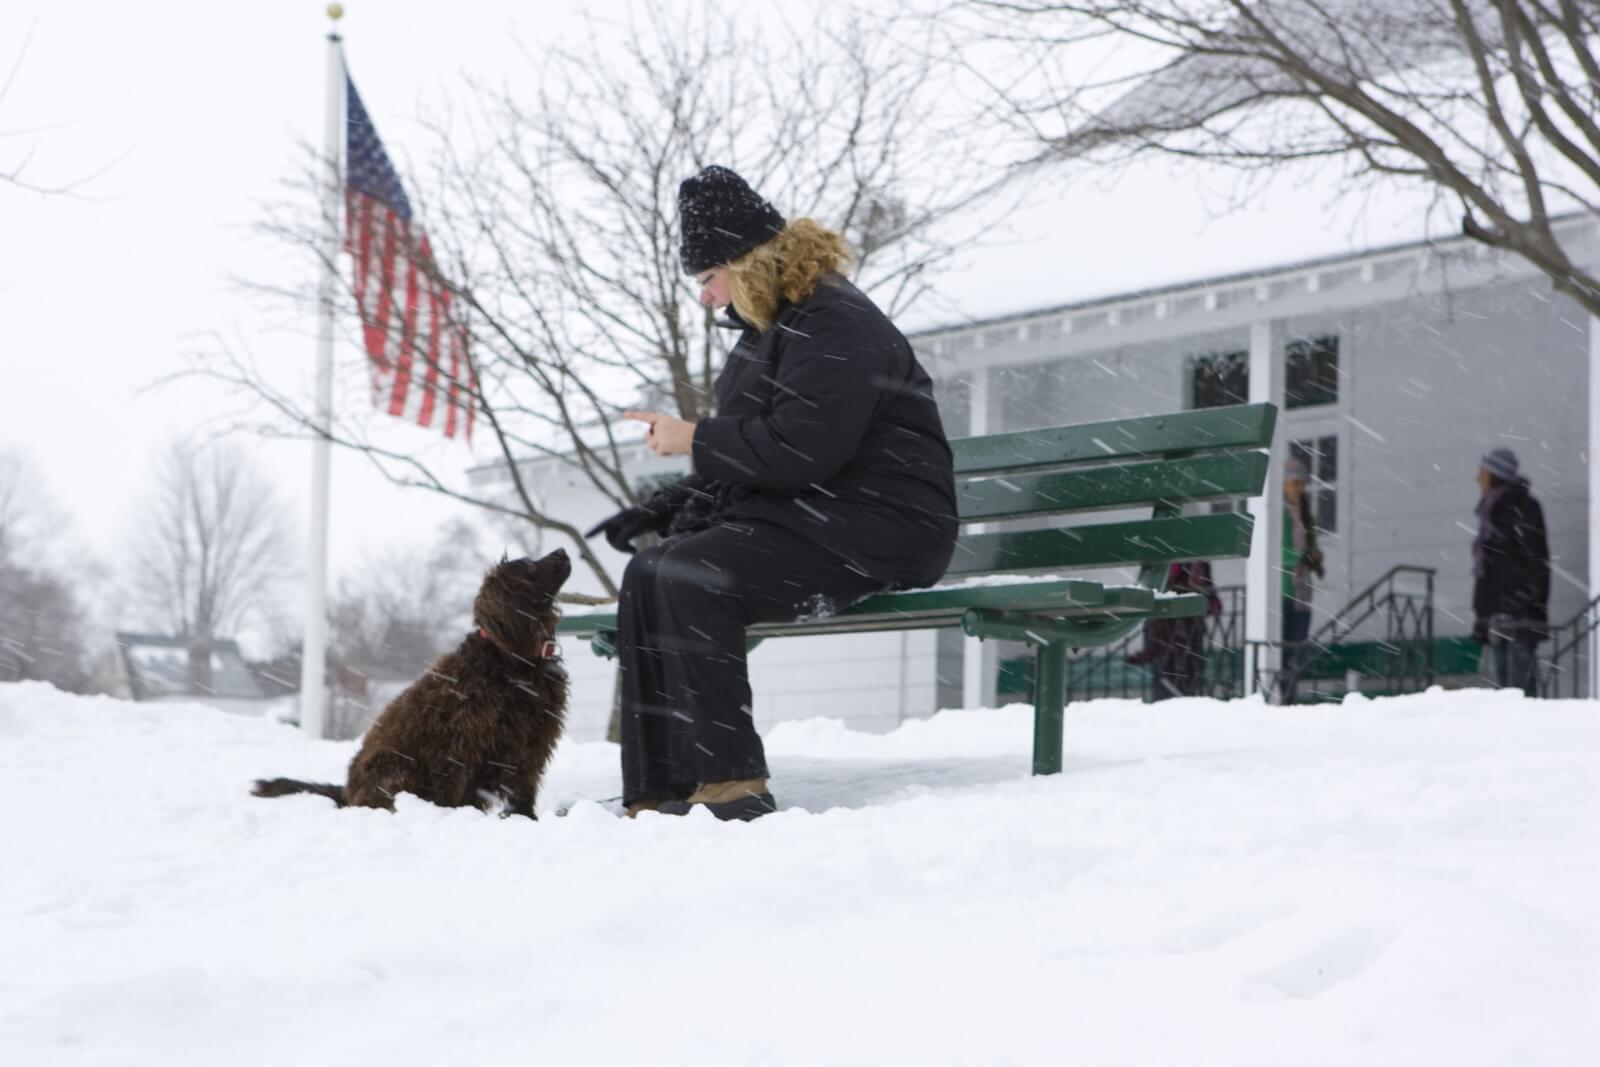 Women sitting in on a park bench with her black dog in the snow